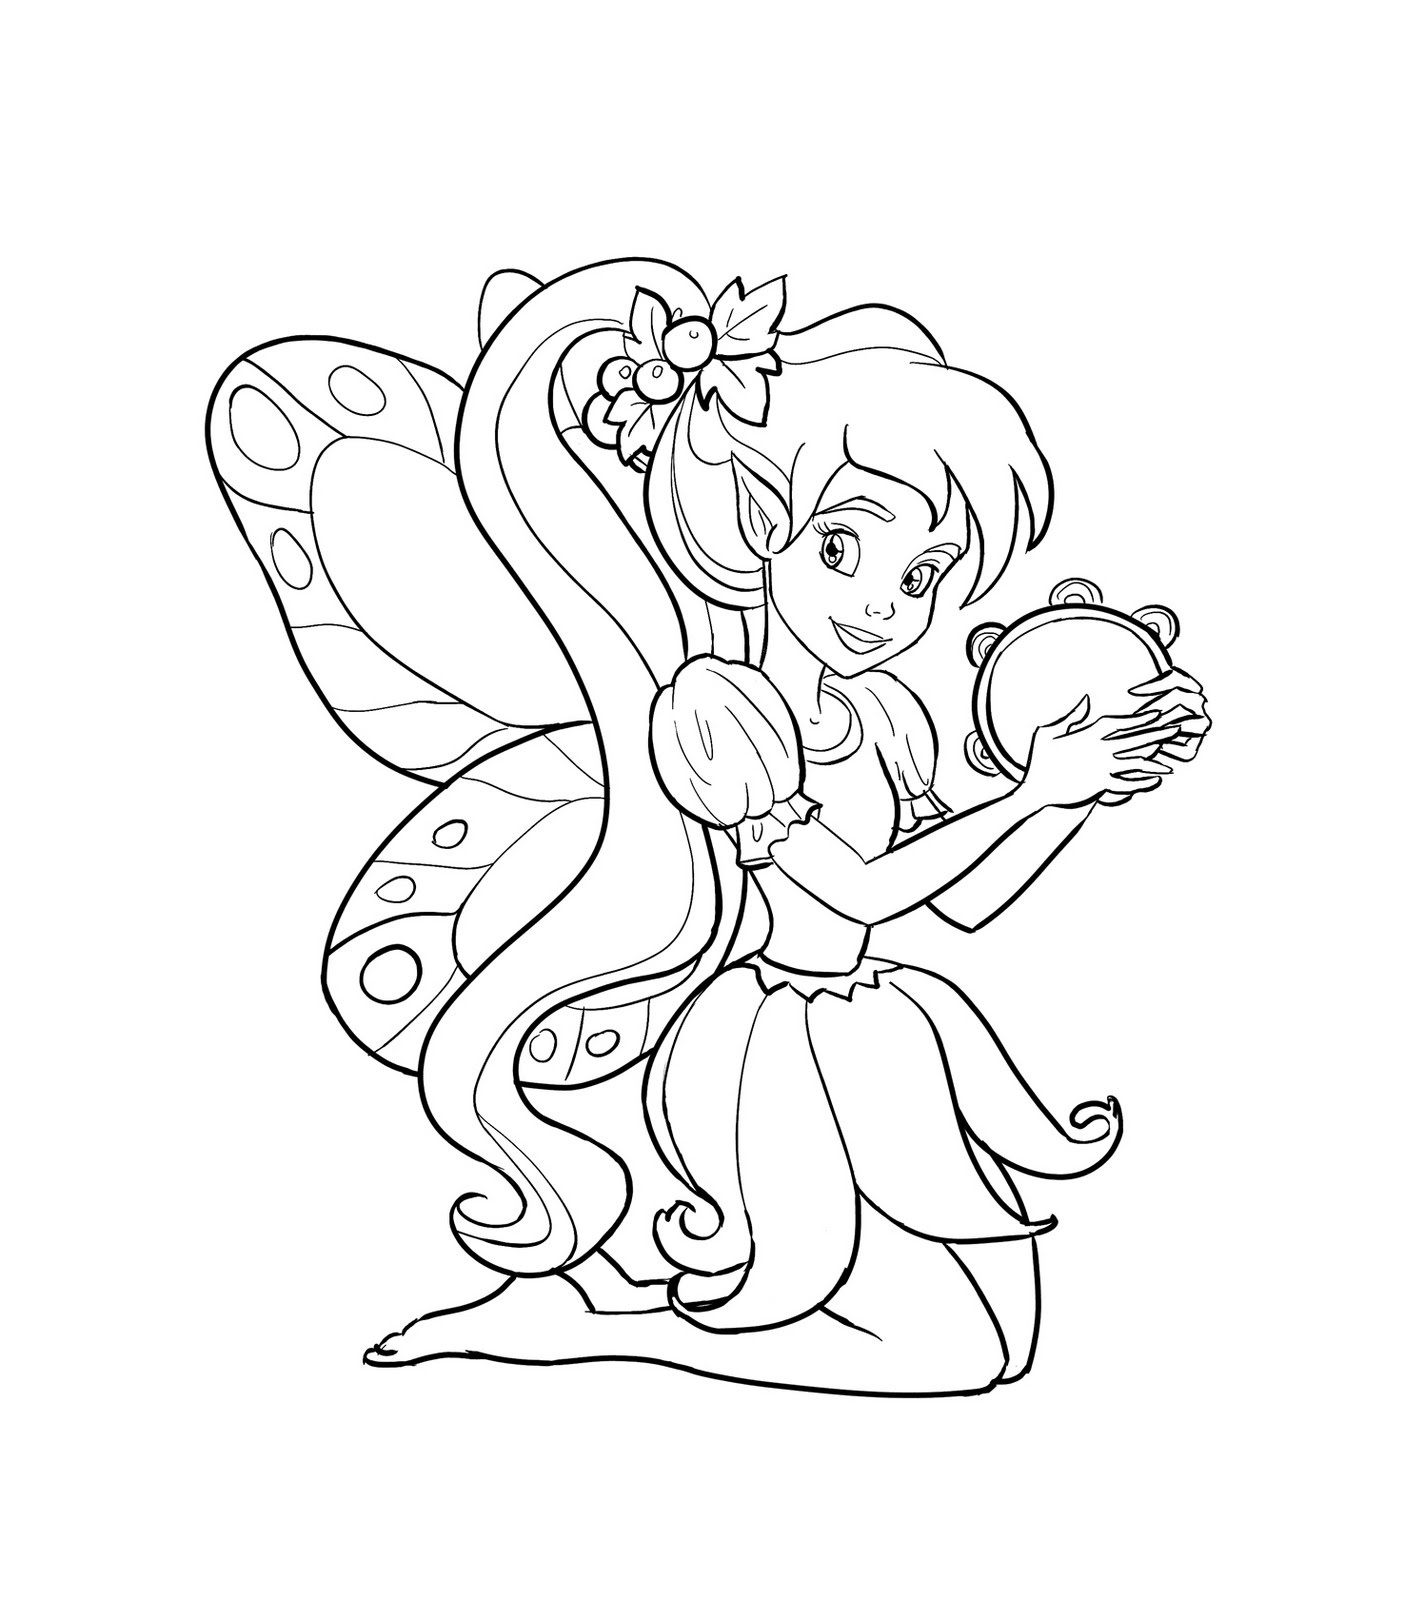 Fairy Pictures To Color - Free Printable Fairy Coloring Pages For - Free Printable Fairy Coloring Pictures